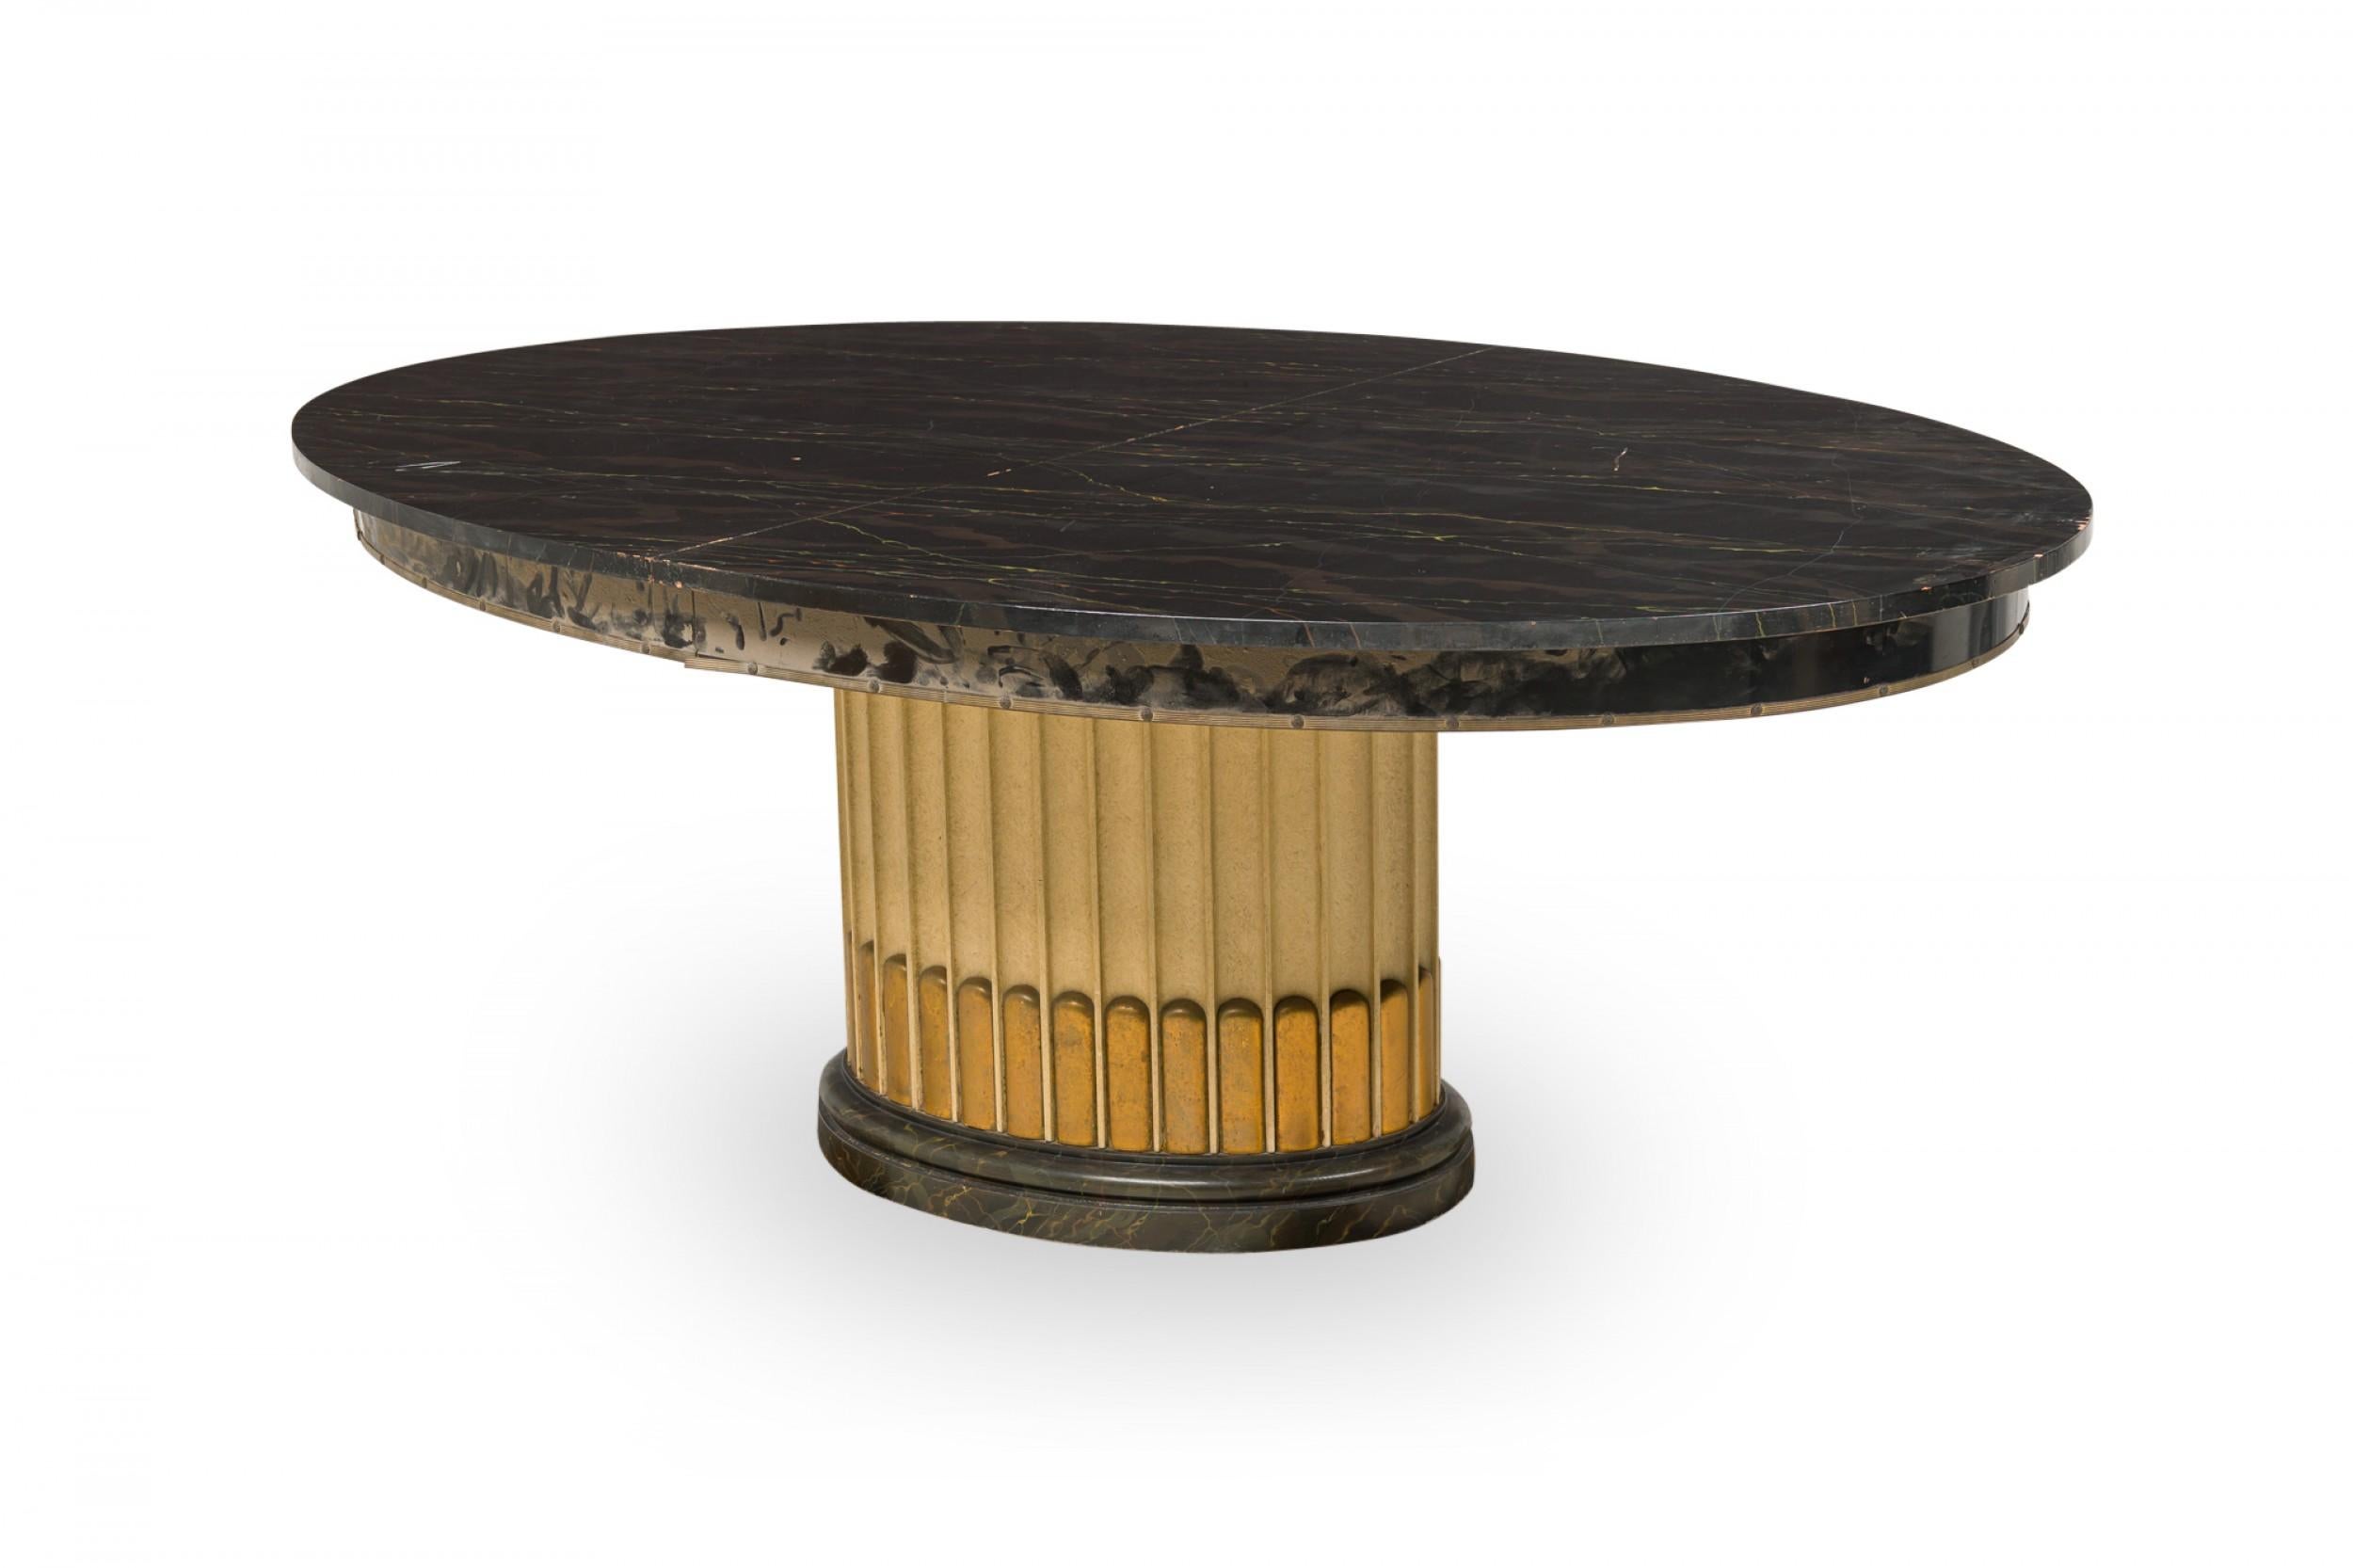 Art Deco American dining table with a black lacquered oval extension top with 2 removable leaves, resting on a fluted column brass and cream painted base. (PAUL FRANKL).